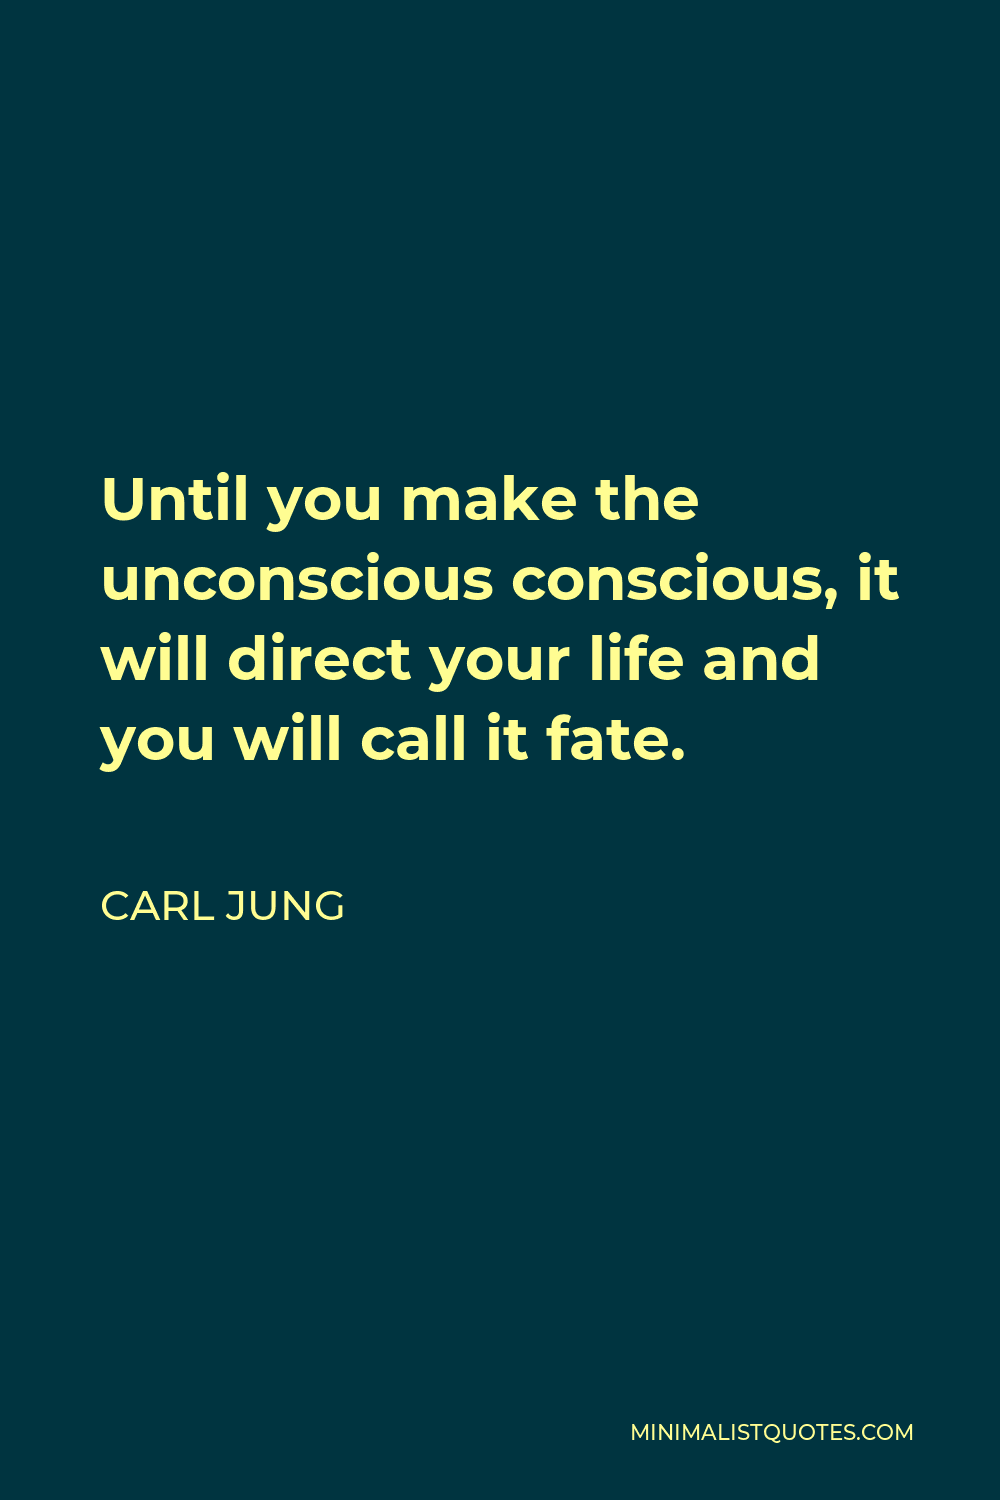 Carl Jung Quote Until You Make The Unconscious Conscious It Will Direct Your Life And You Will